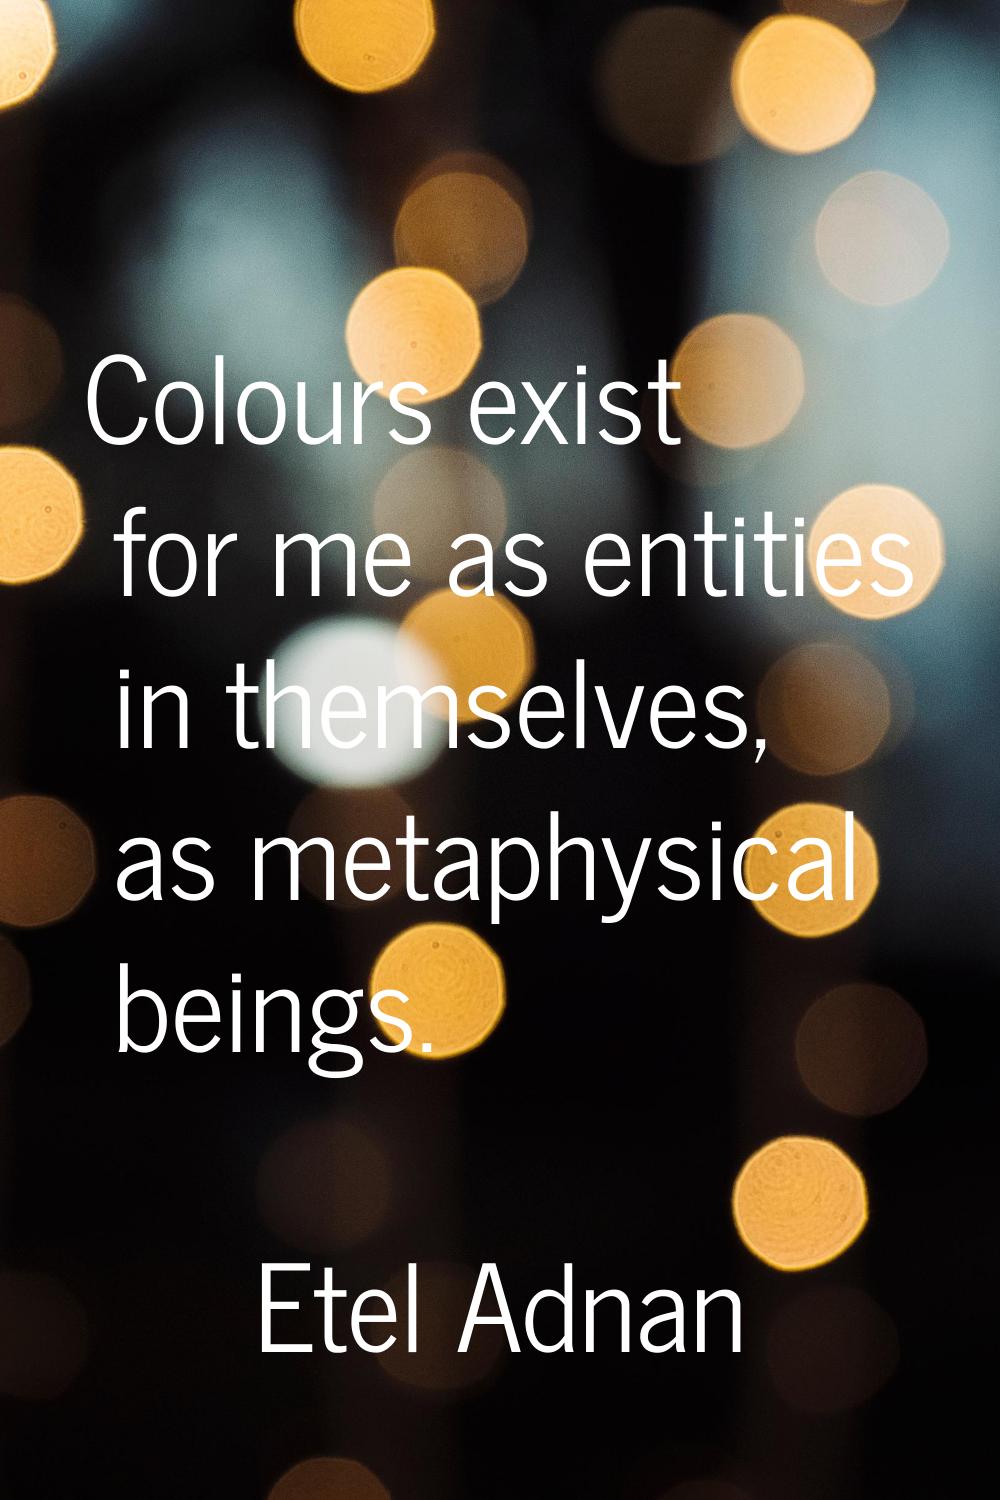 Colours exist for me as entities in themselves, as metaphysical beings.